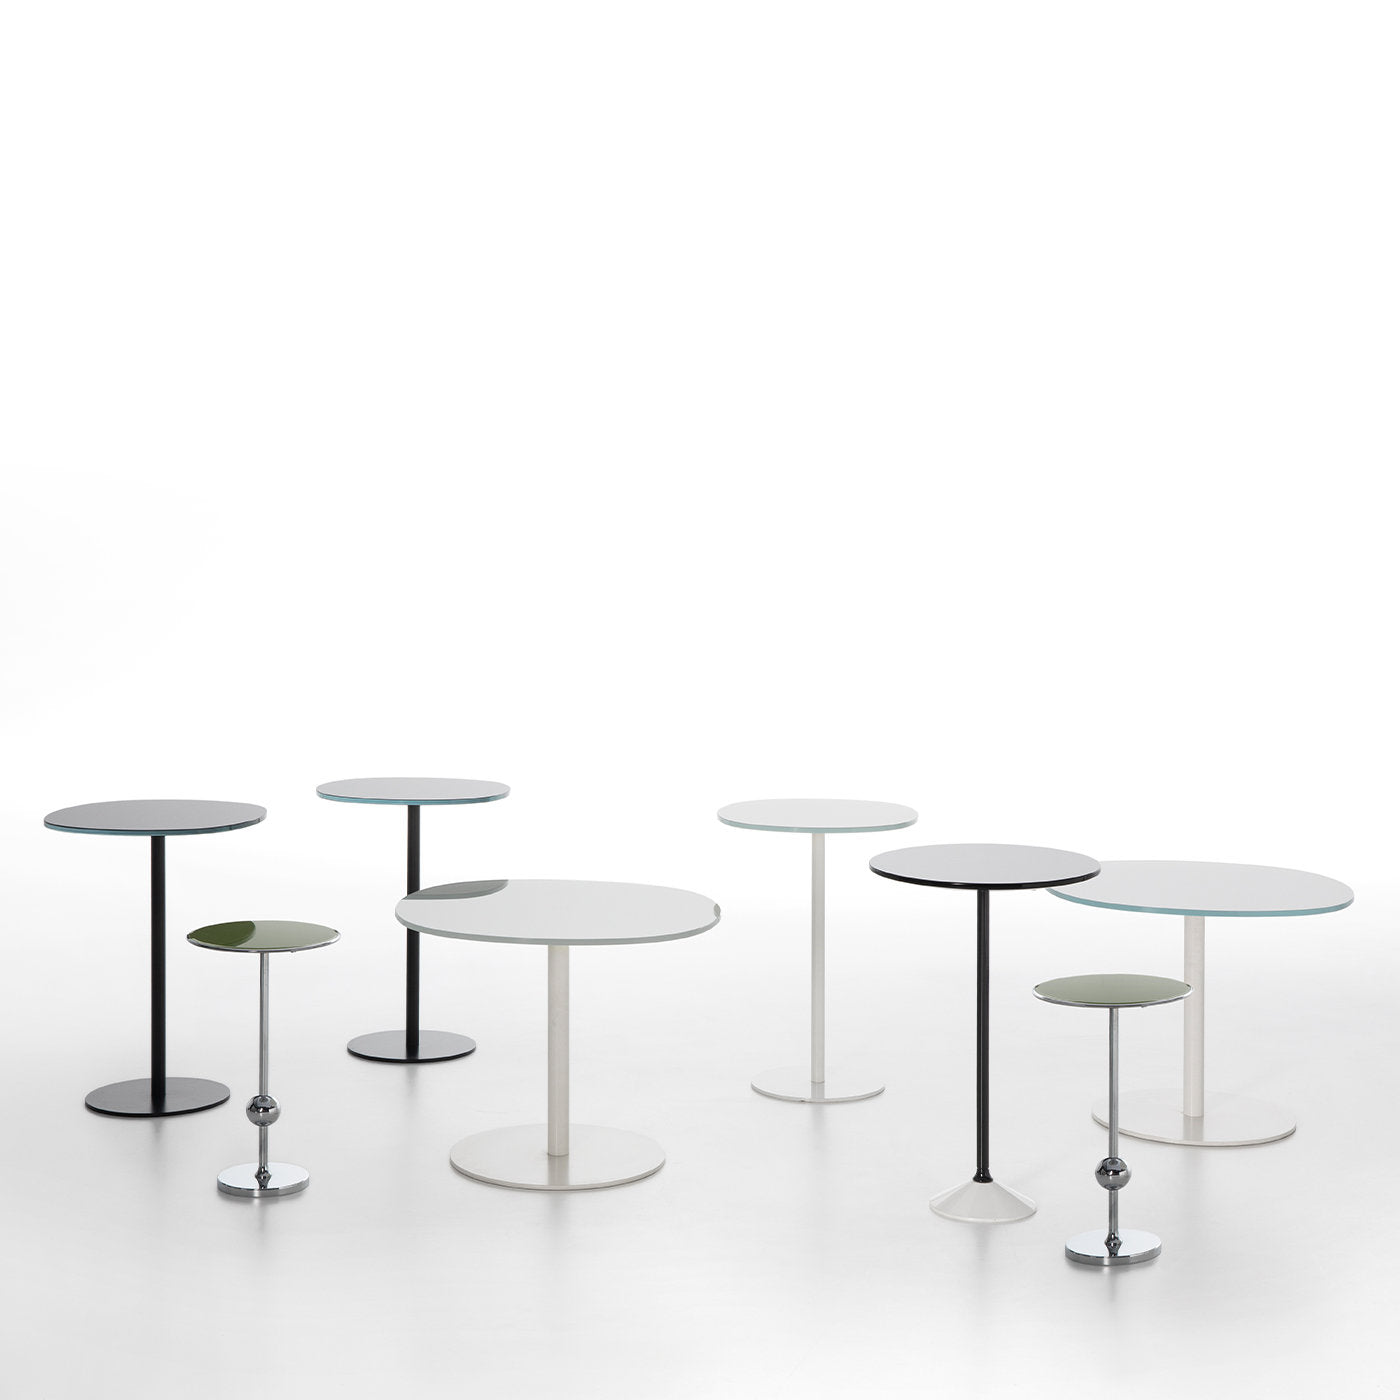 Solenoide White Tall Side Table by Piero Lissoni - Alternative view 2